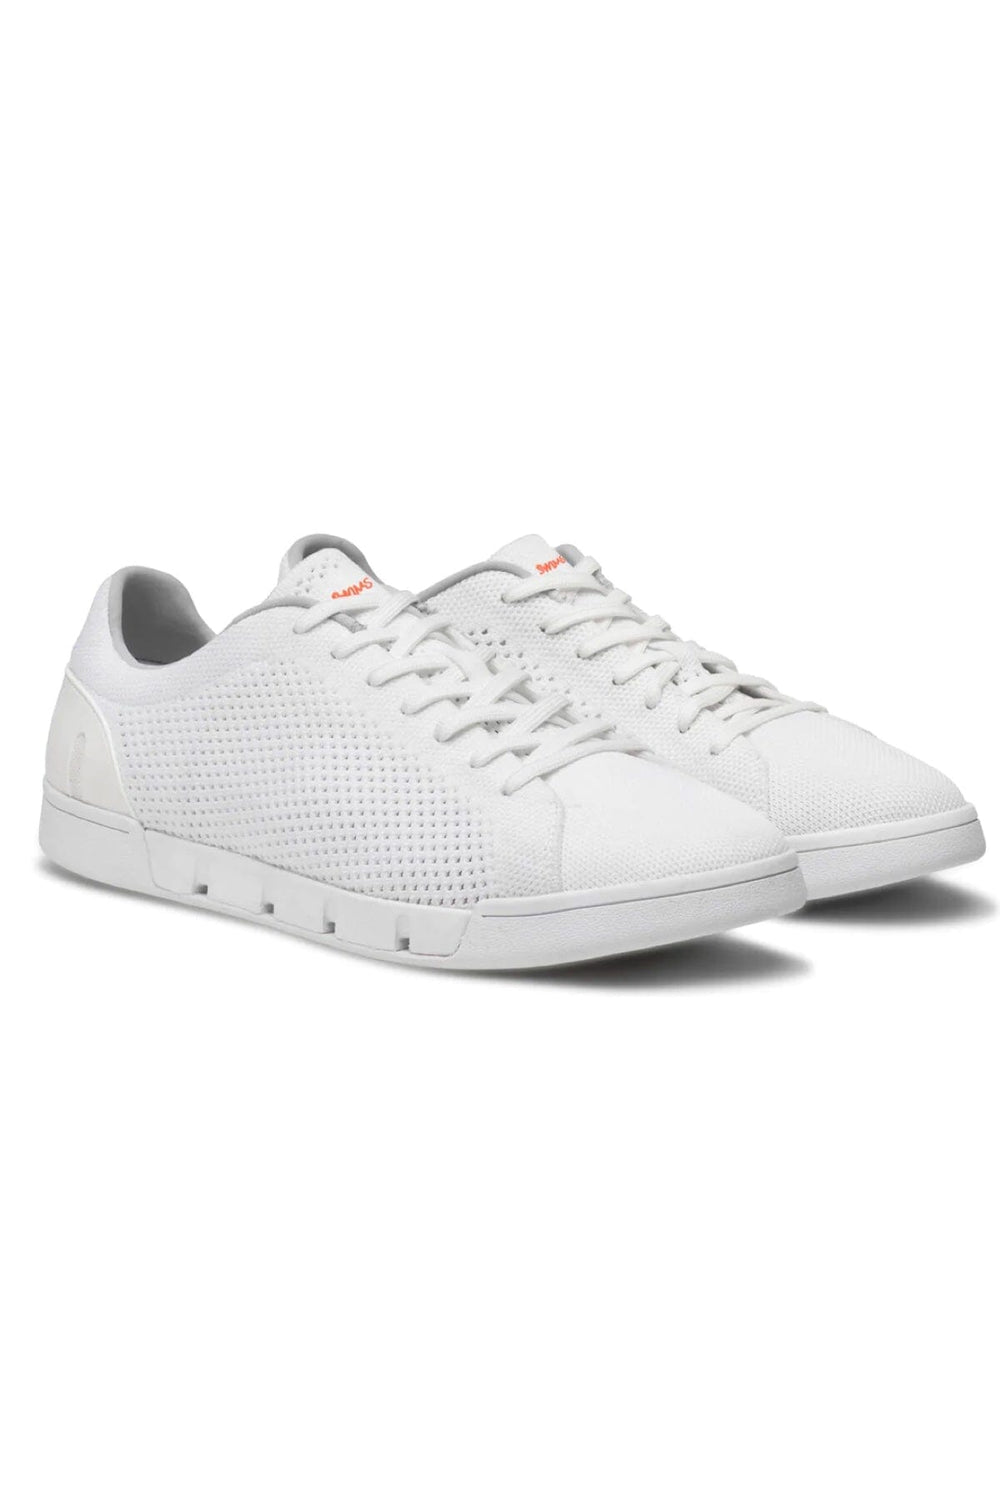 Chaussures tricot Breeze Tennis Swims 